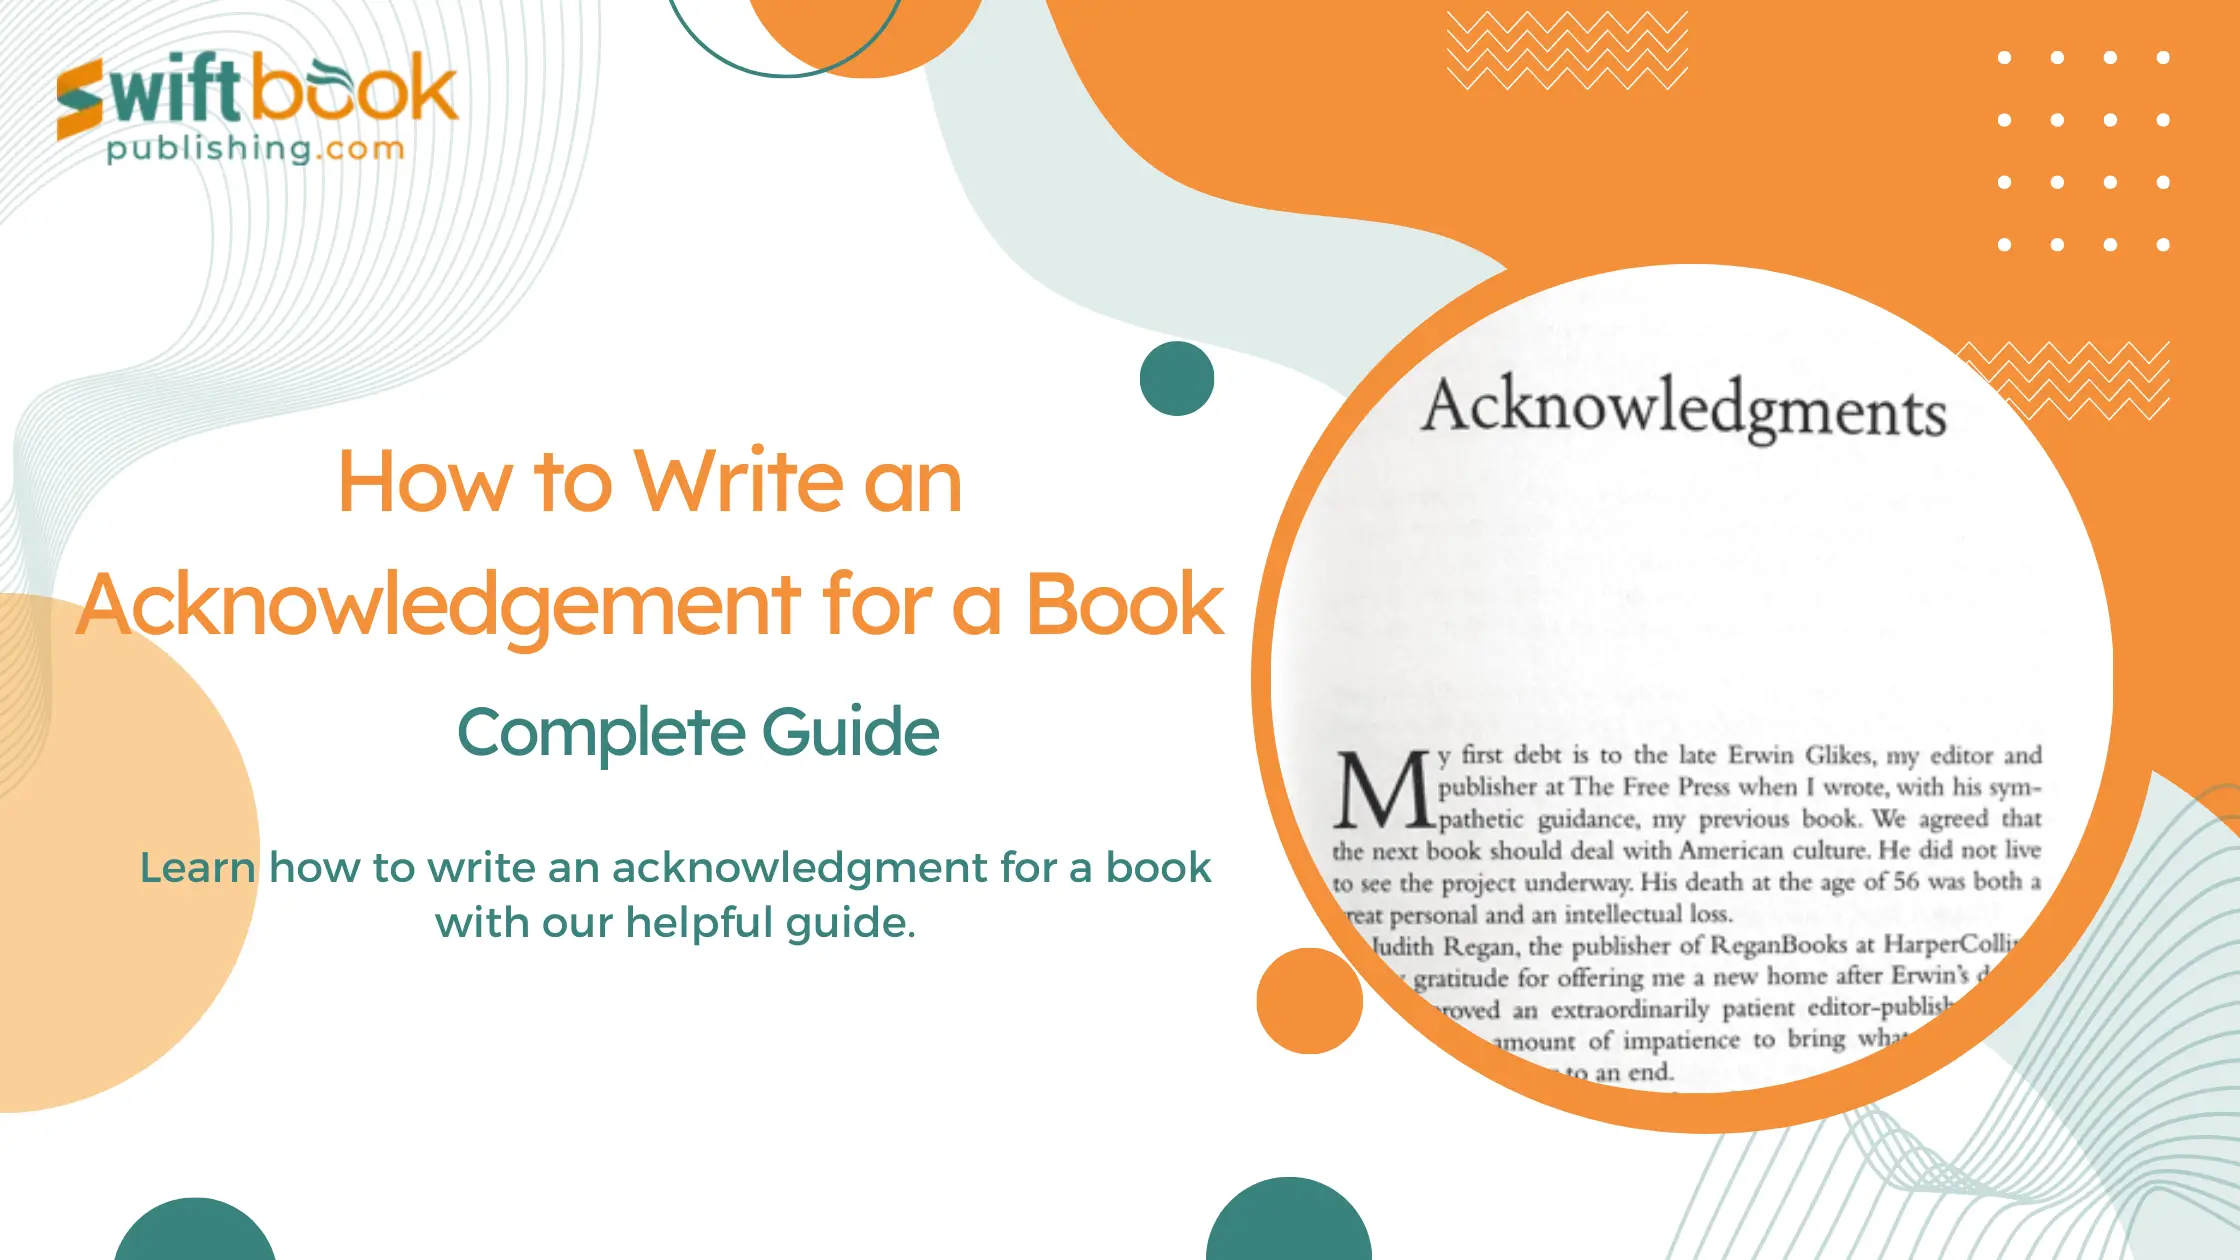 Learn how to write an acknowledgment for a book with our helpful guide. Find the value, ideal placement, and inspiring examples for your book acknowledgements - Best Practices